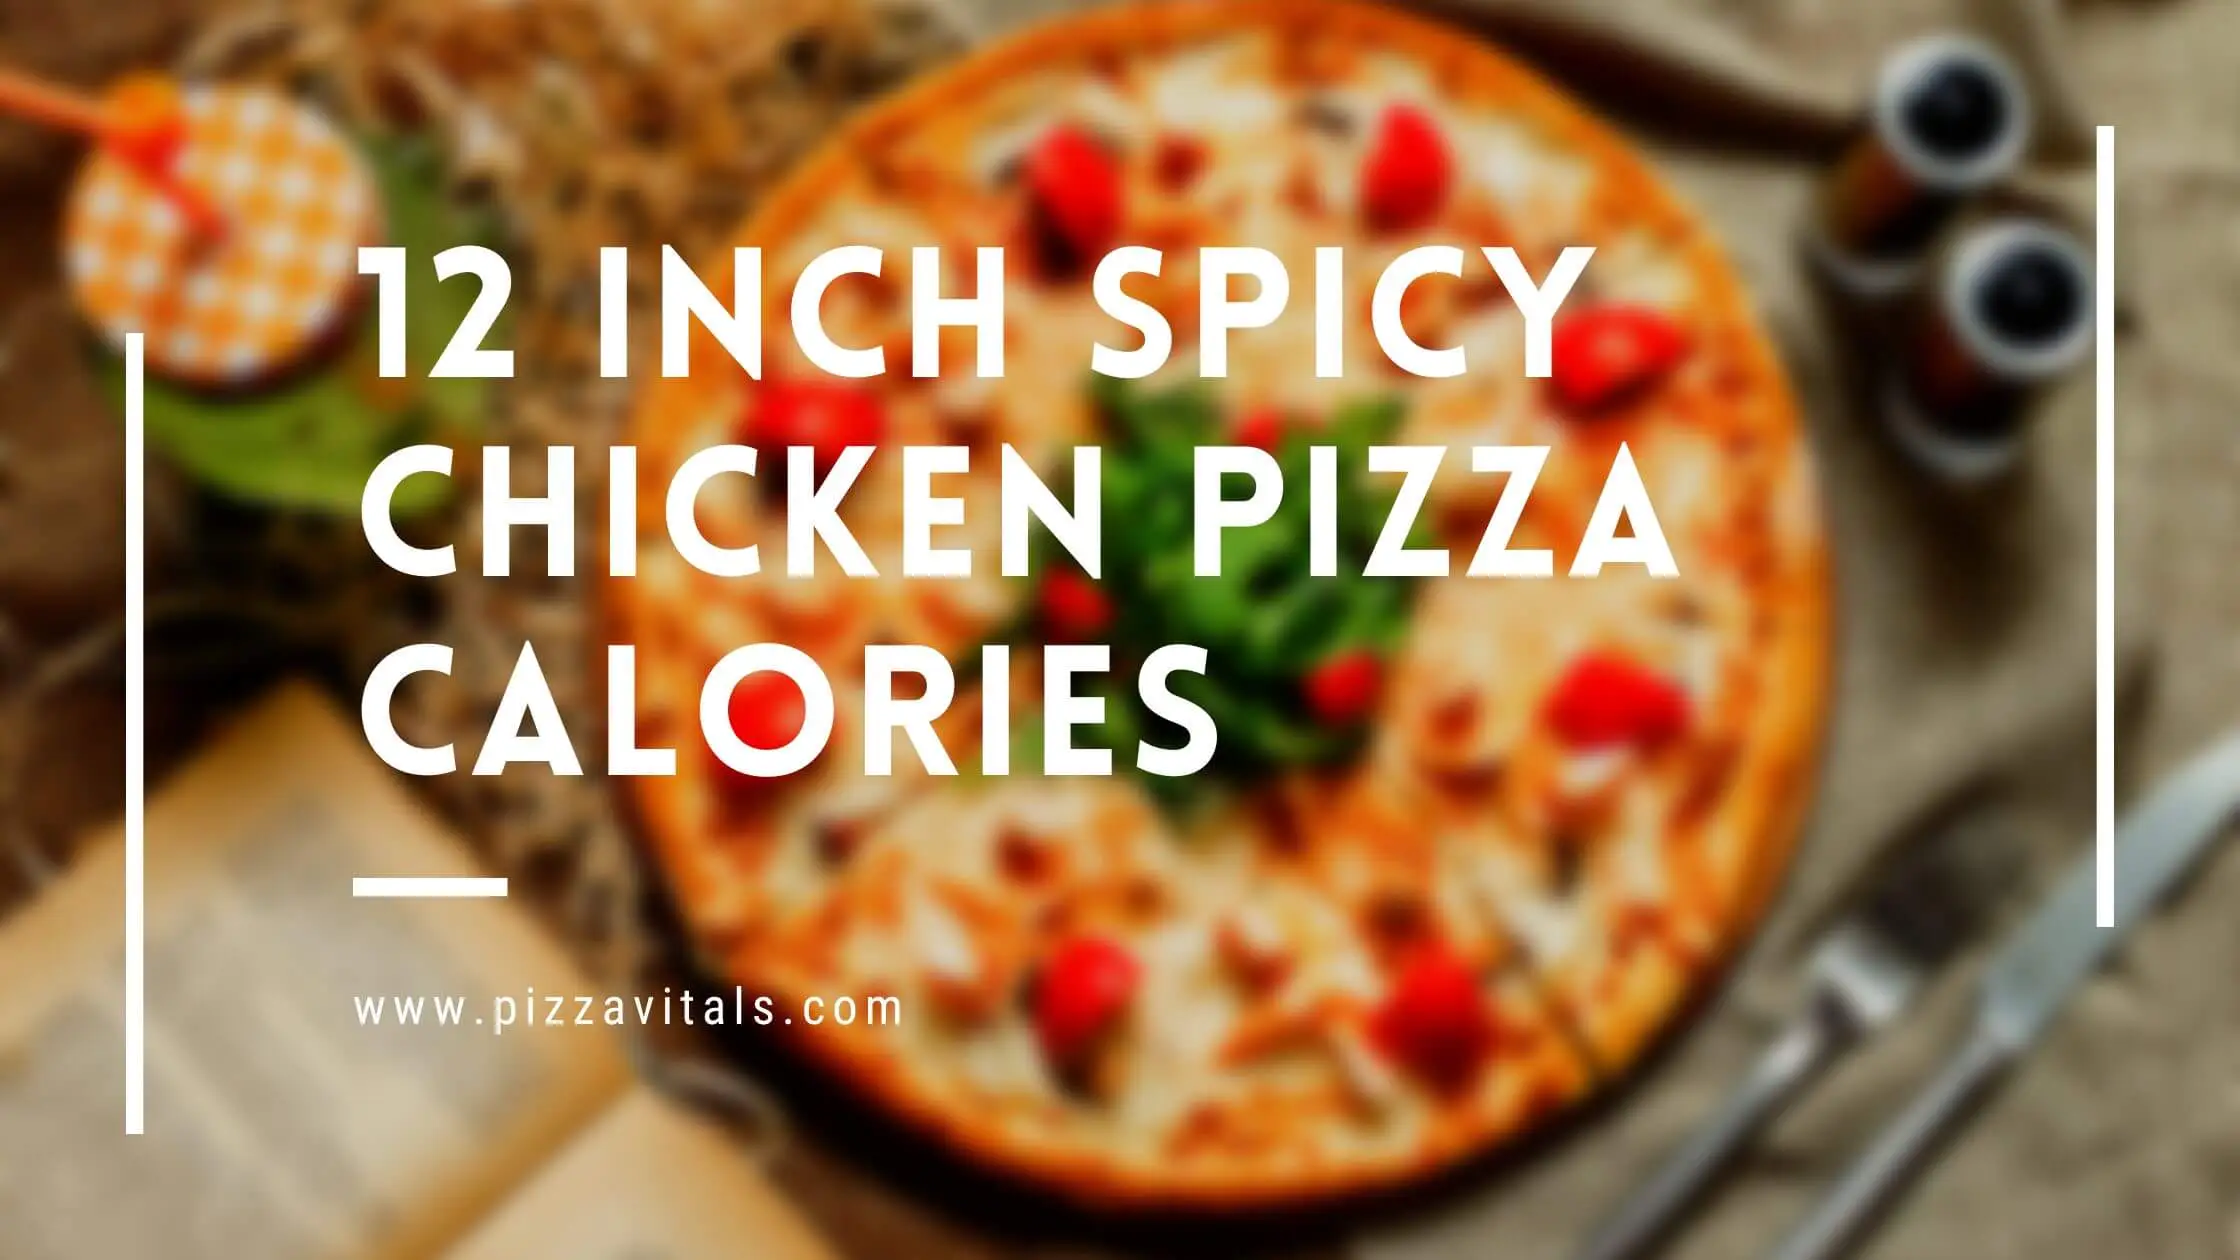 Discover 12 inch spicy chicken pizza calories: Satisfy Your Cravings While Staying on your diet